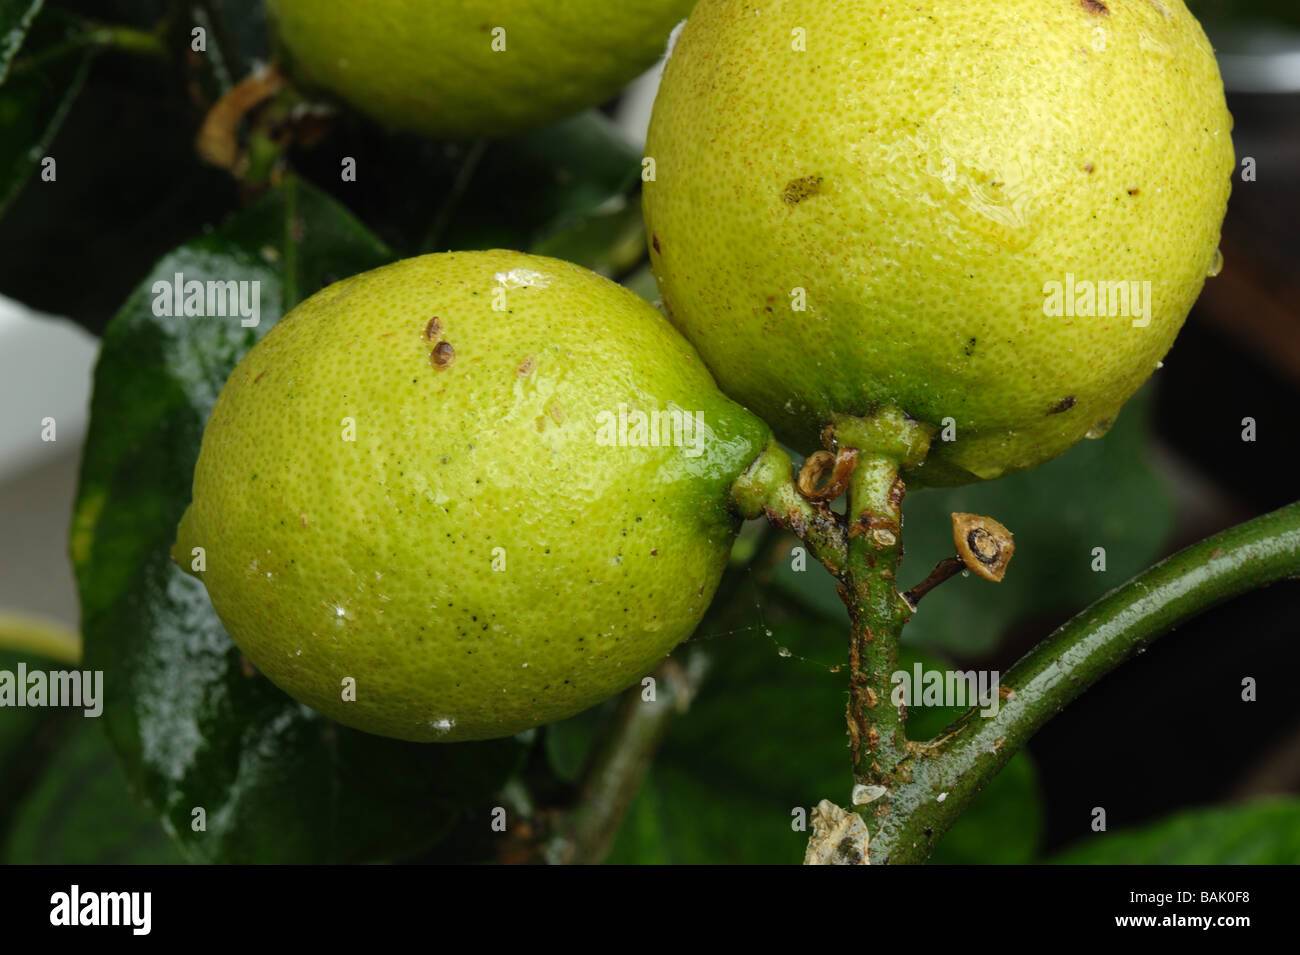 Honeydew soft brown scale insects Coccus hesperidum on lemon fruit Stock Photo